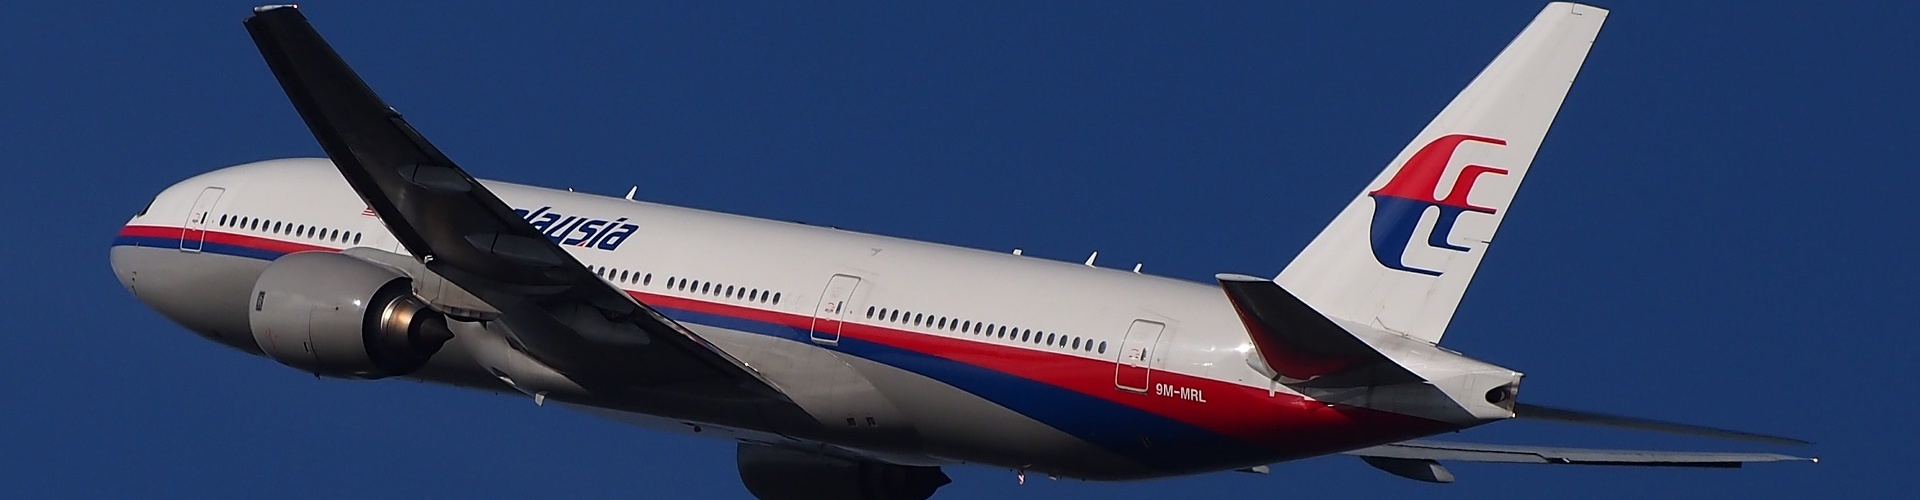 The Mystery of MH370 Takes a Murderous Turn